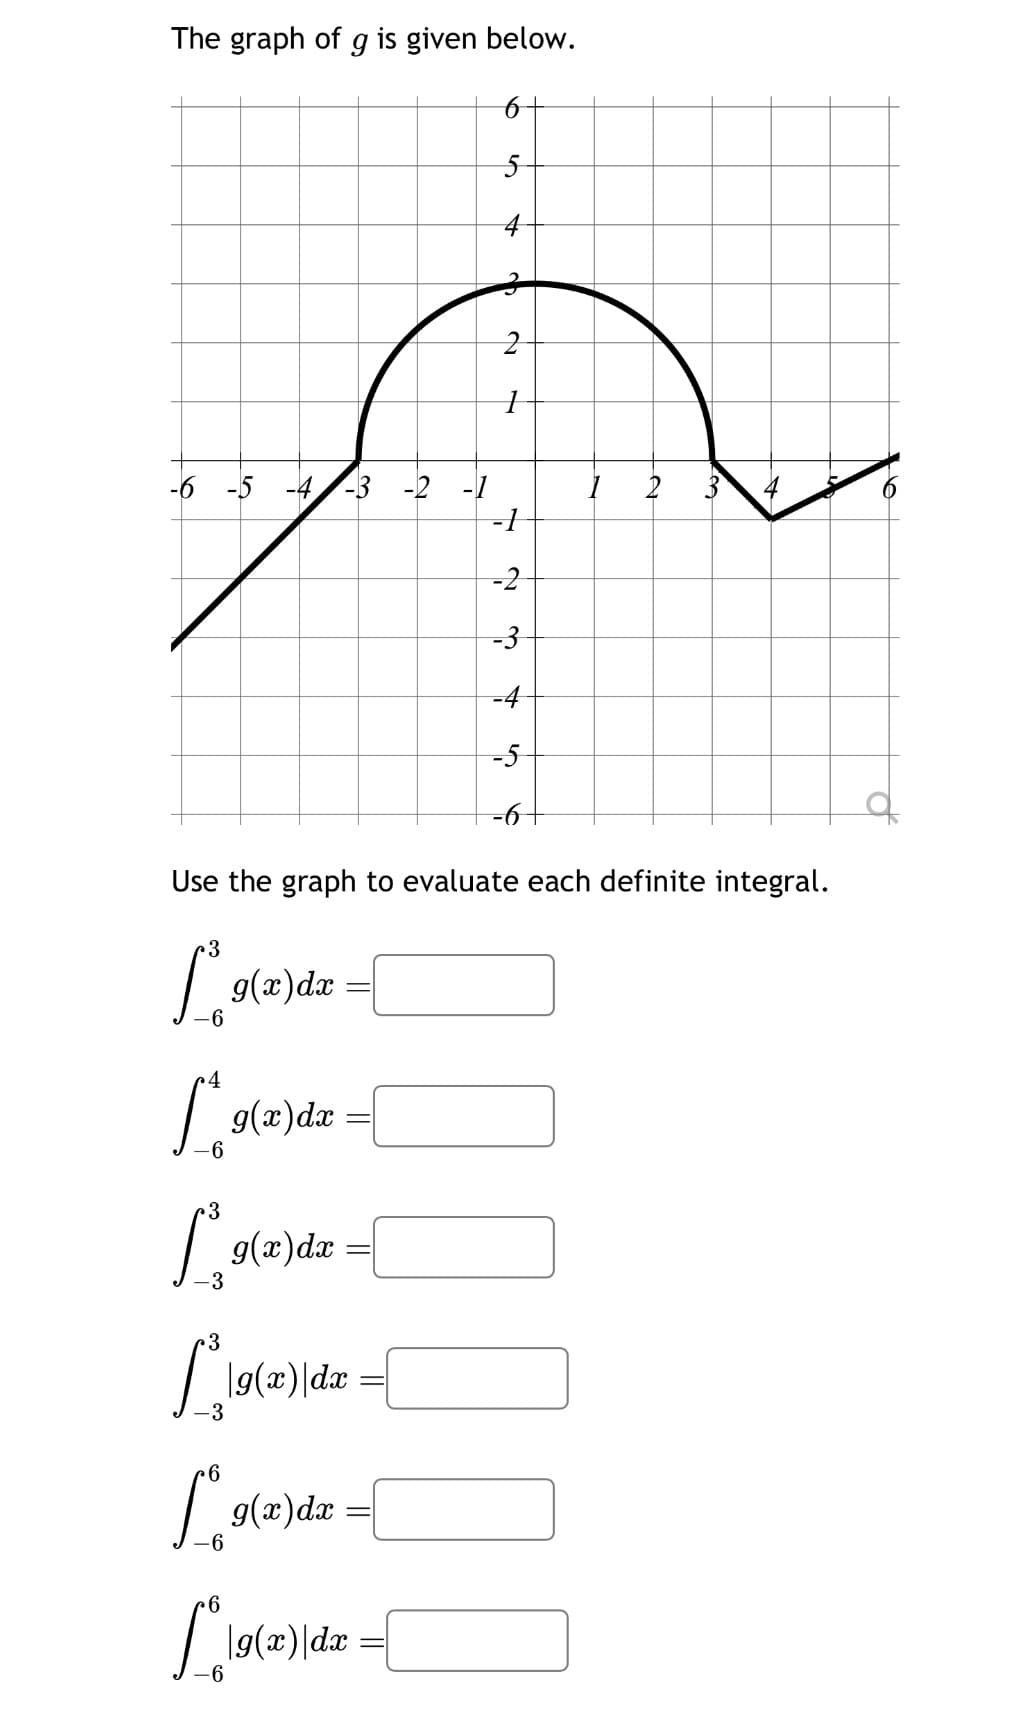 The graph of g is given below.
-6 -5 -4 -3 -2 -1
4
-6
Use the graph to evaluate each definite integral.
3
L₁ = [
g(x) dx
3
19
3
g(x) dx
-3
= [
g(x) dx =
|g(x) dx
6
Lºg(x)
-6
g(x) dx =
6
6
Co
|g(x)|dx = {
-6
3
2
1
-1
-2
3